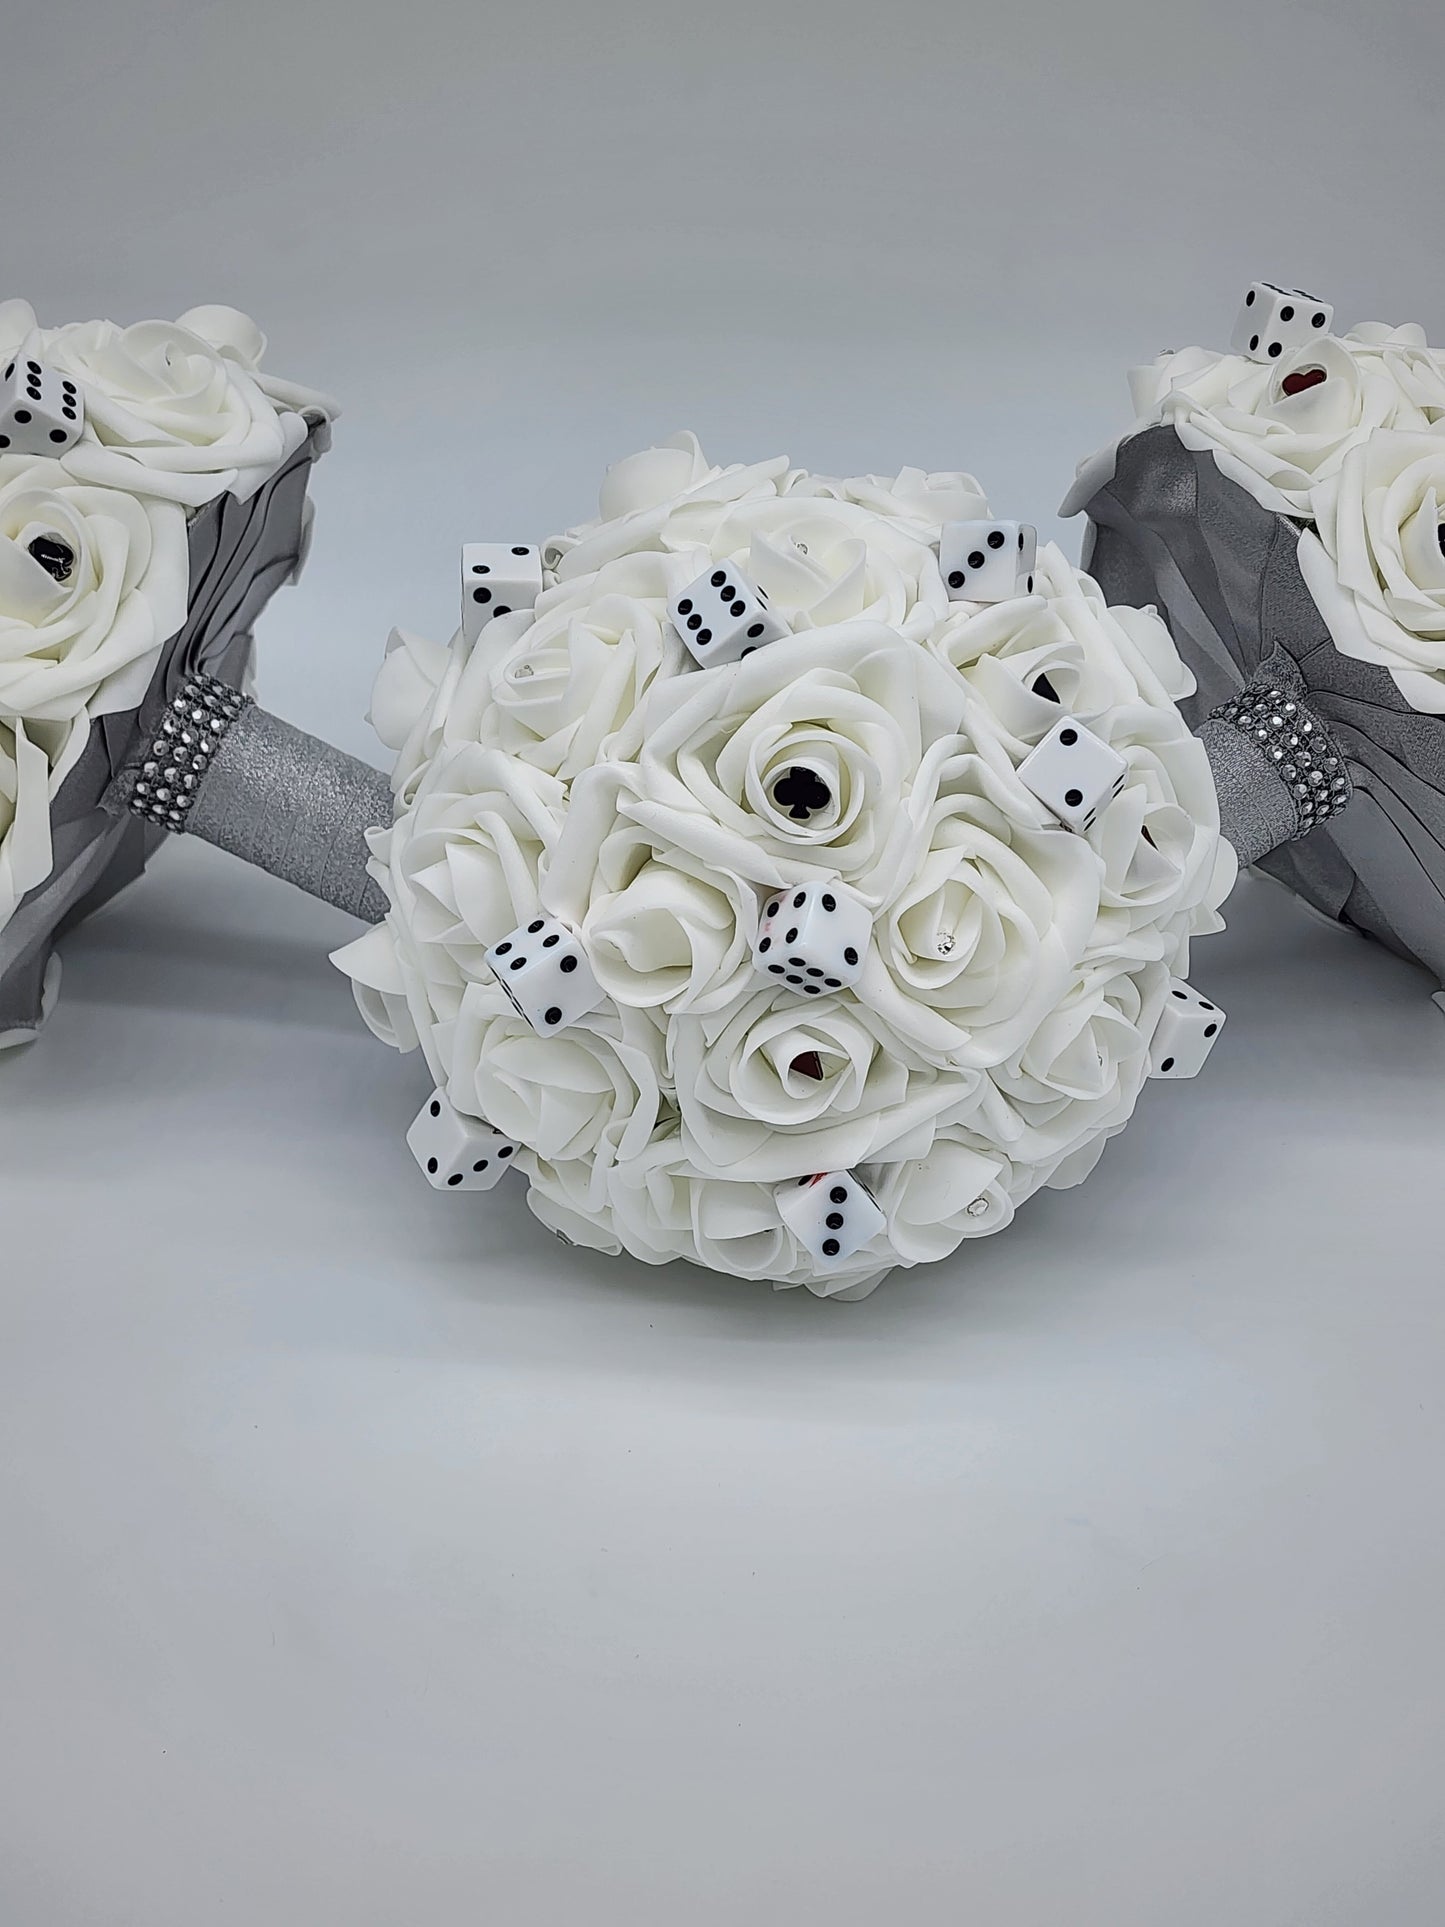 Las Vegas White and Silver Themed Bridal Bouquet